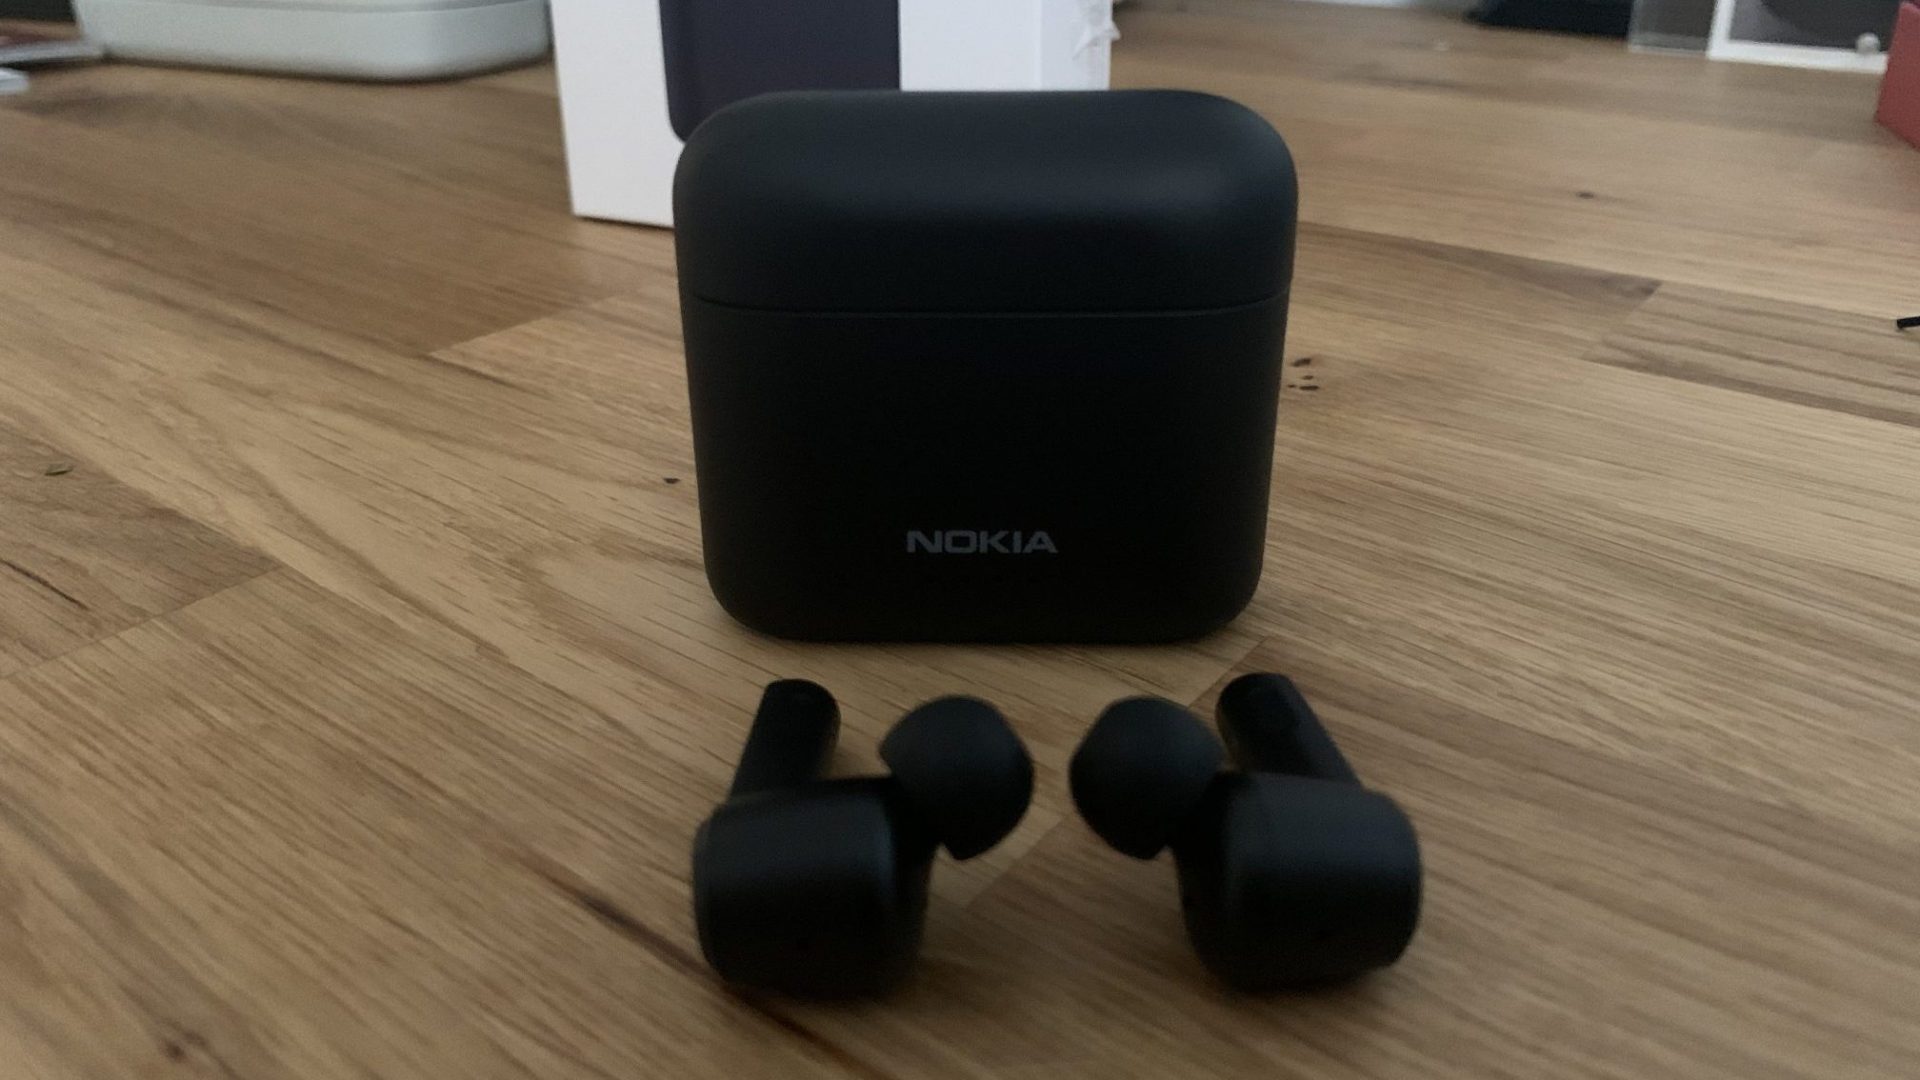 Nokia BH-805 noise cancelling earbuds overview